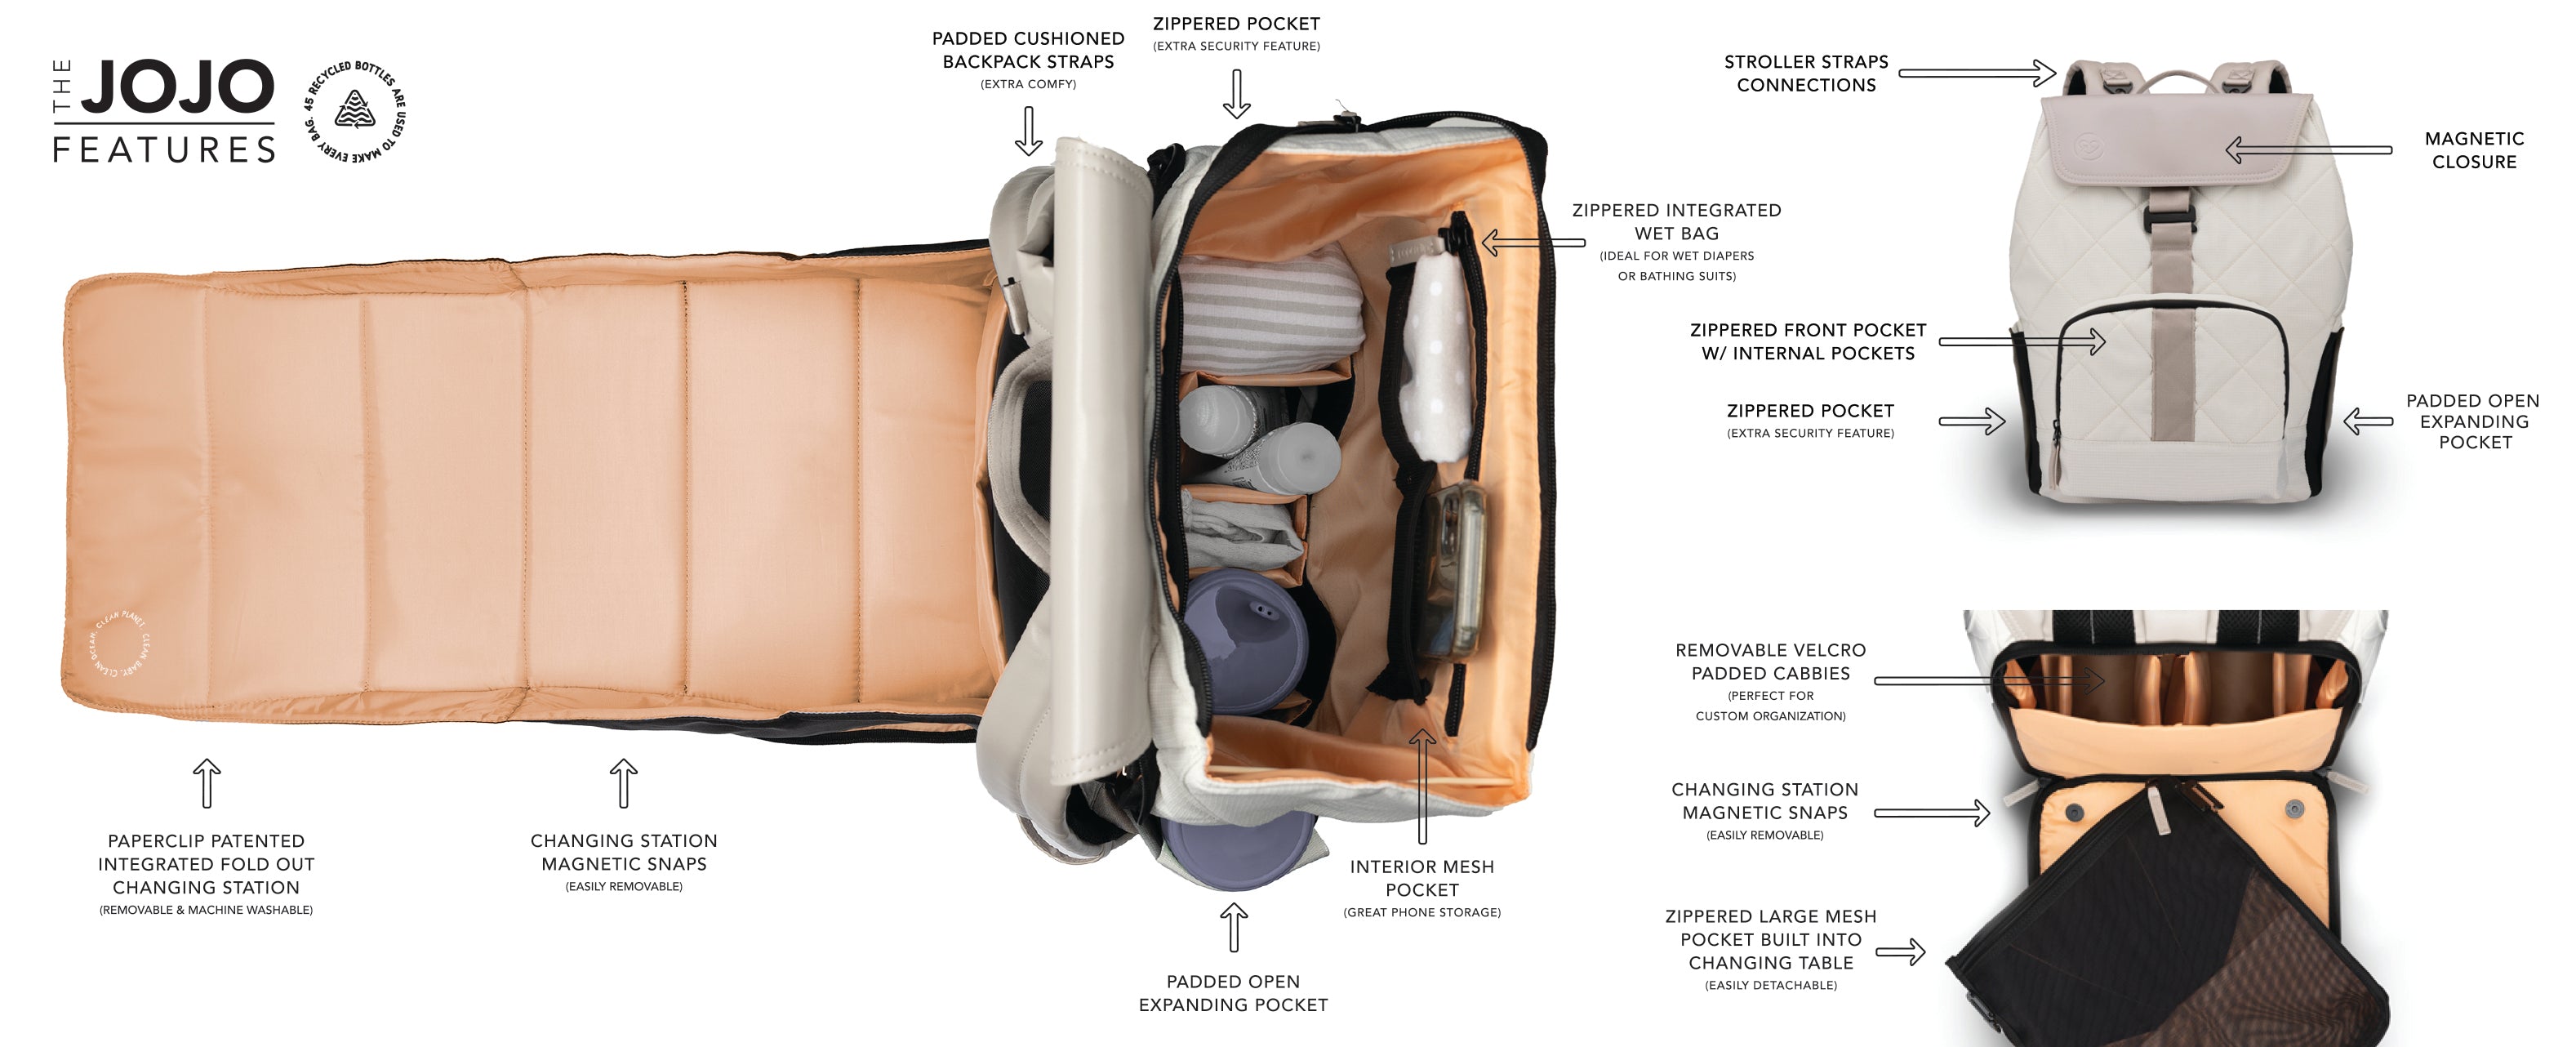 Diaper Bag Backpack & Changing Station – Paperclip